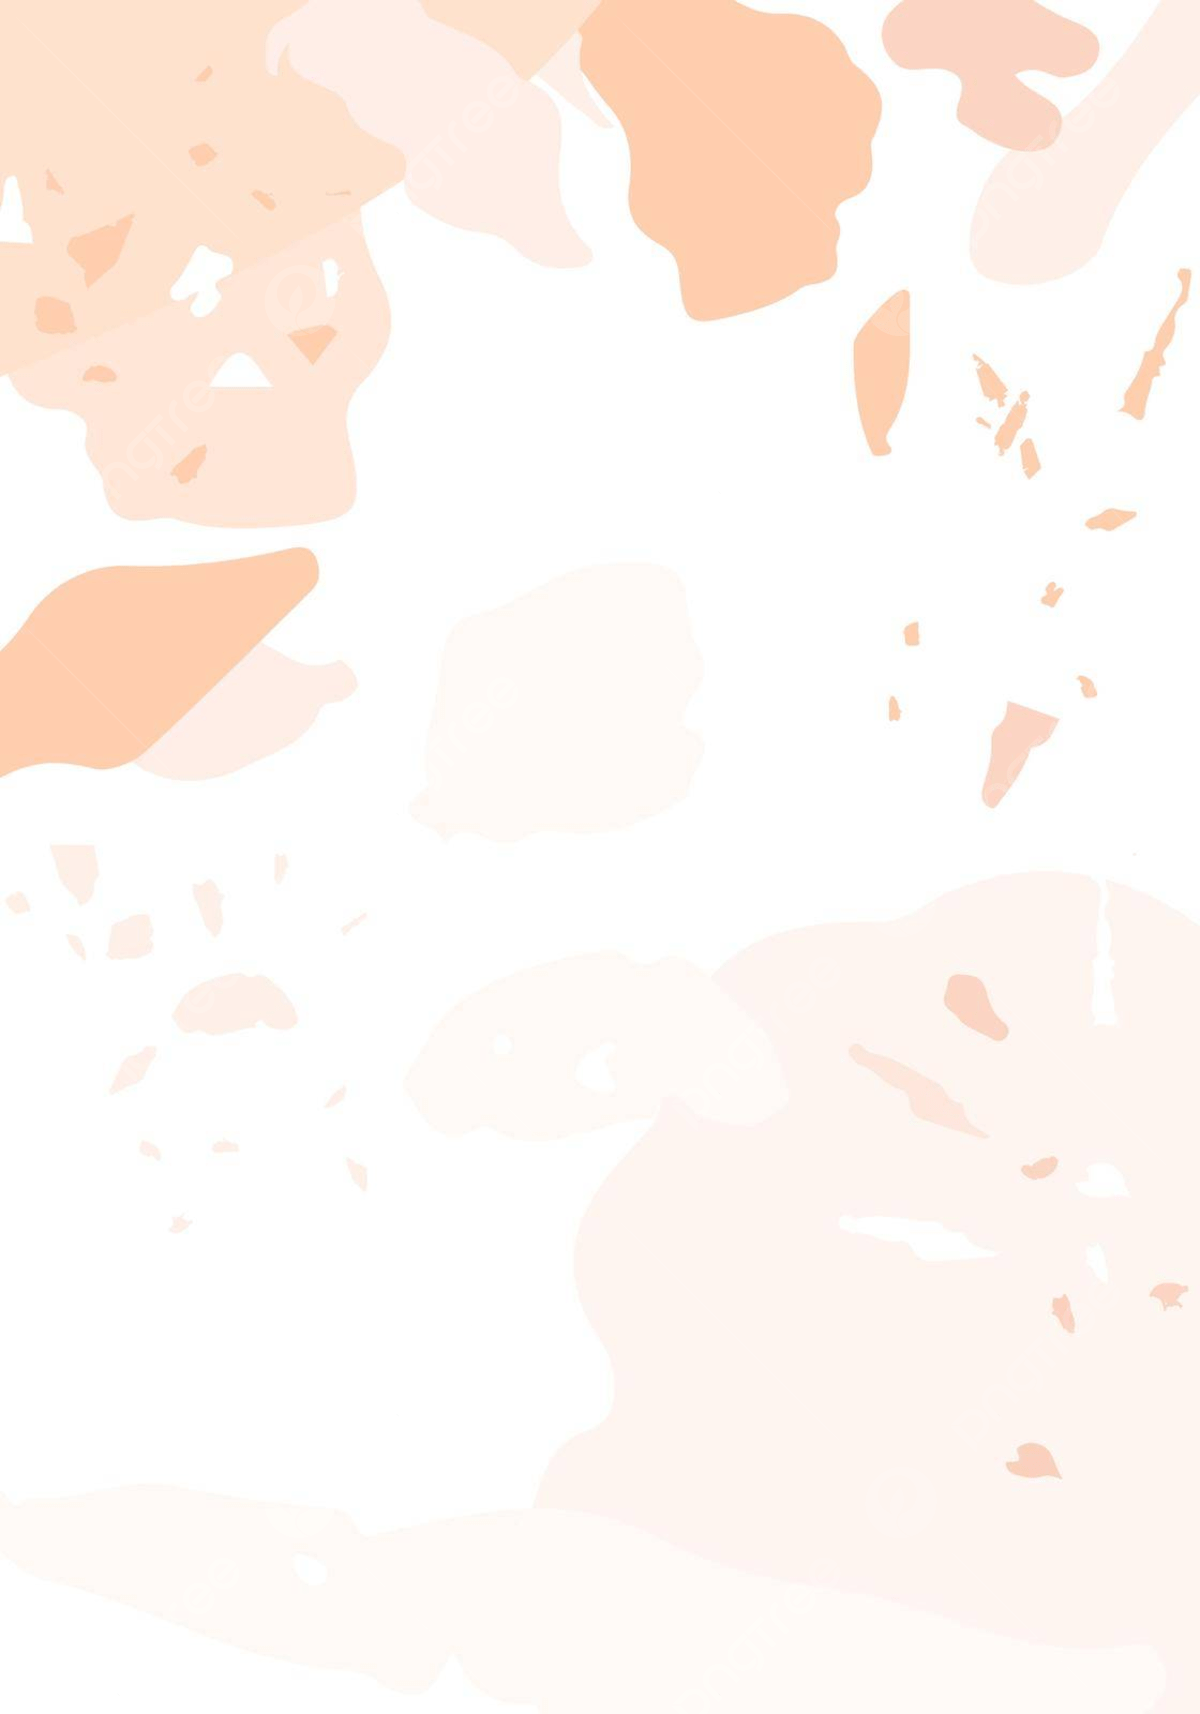 A phone background with a white, pink, and peach colored paint splatter design. - Terrazzo